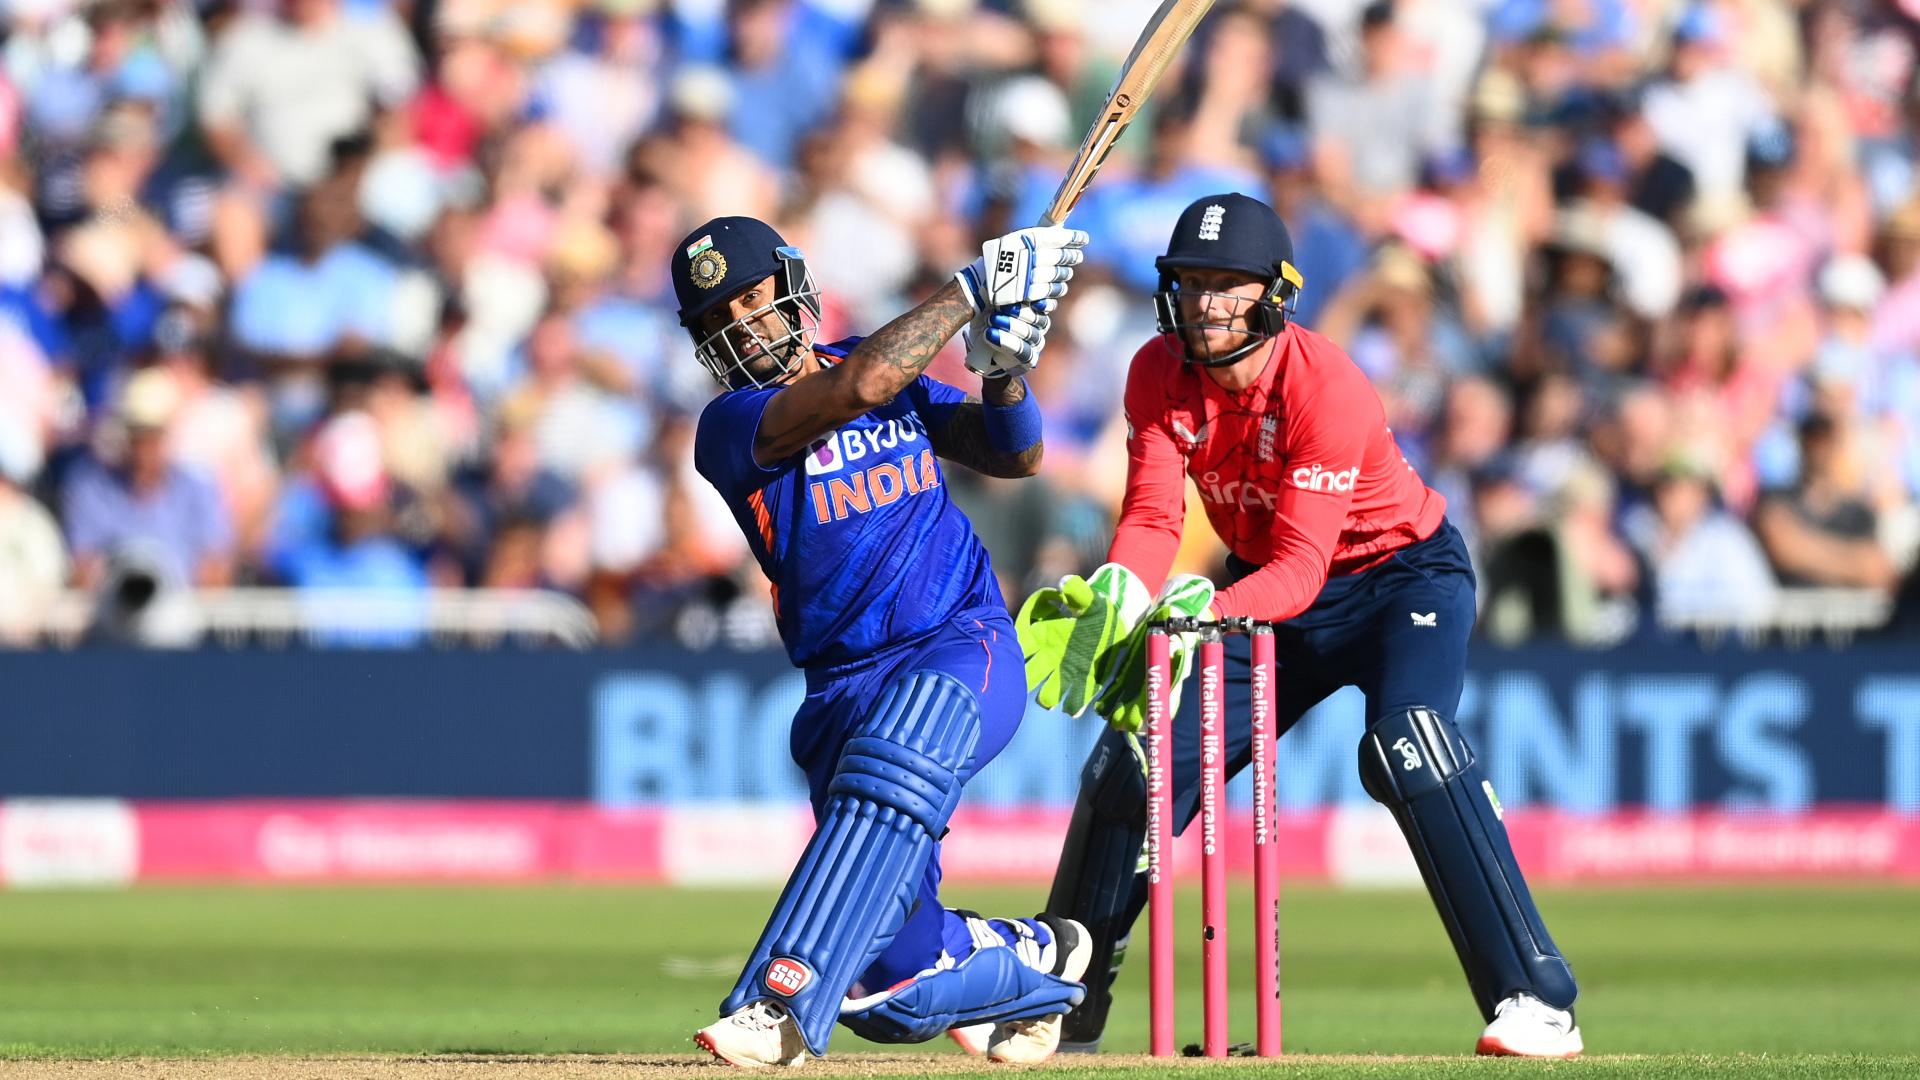 How To Watch Live Cricket Streaming Online In 2023 - Lakshya